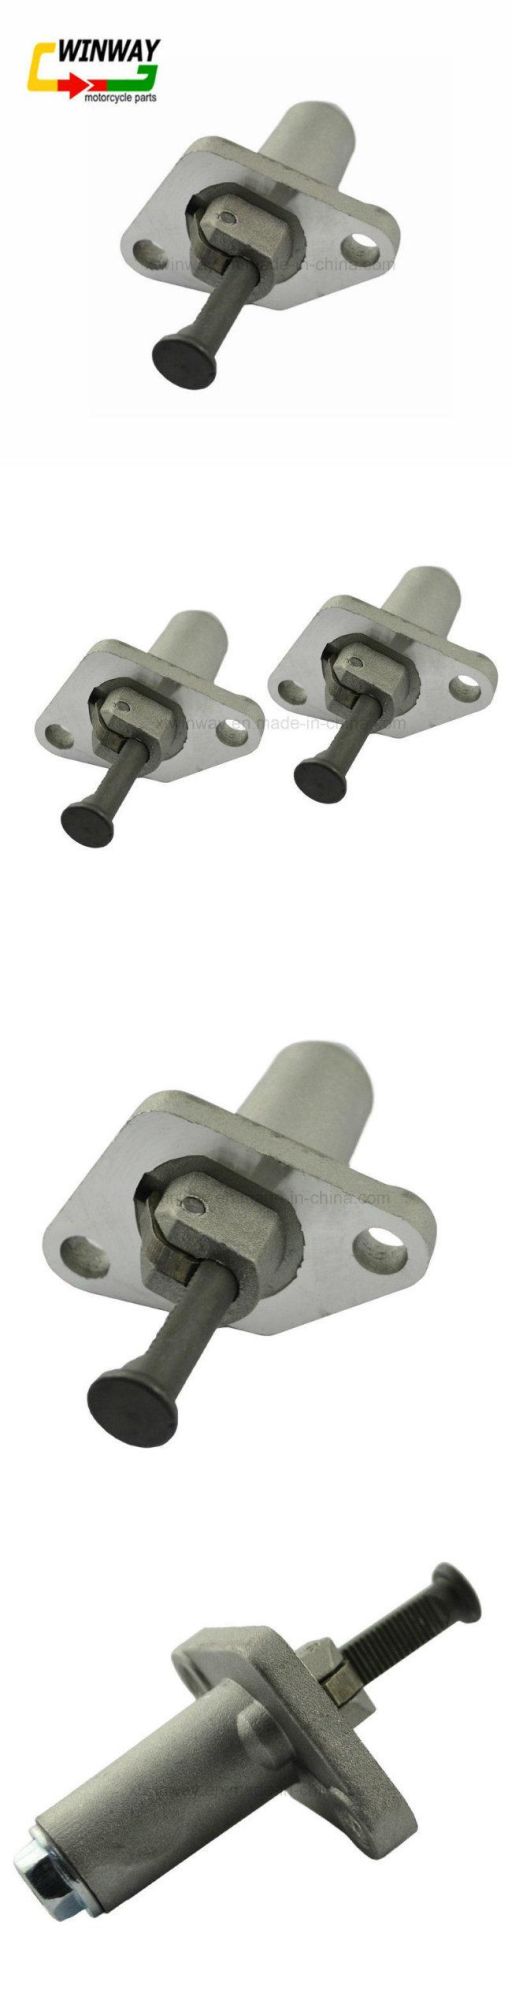 Ww-8527 Motorcycle Engine Parts Cam Chain Tensioner for Cg125cc